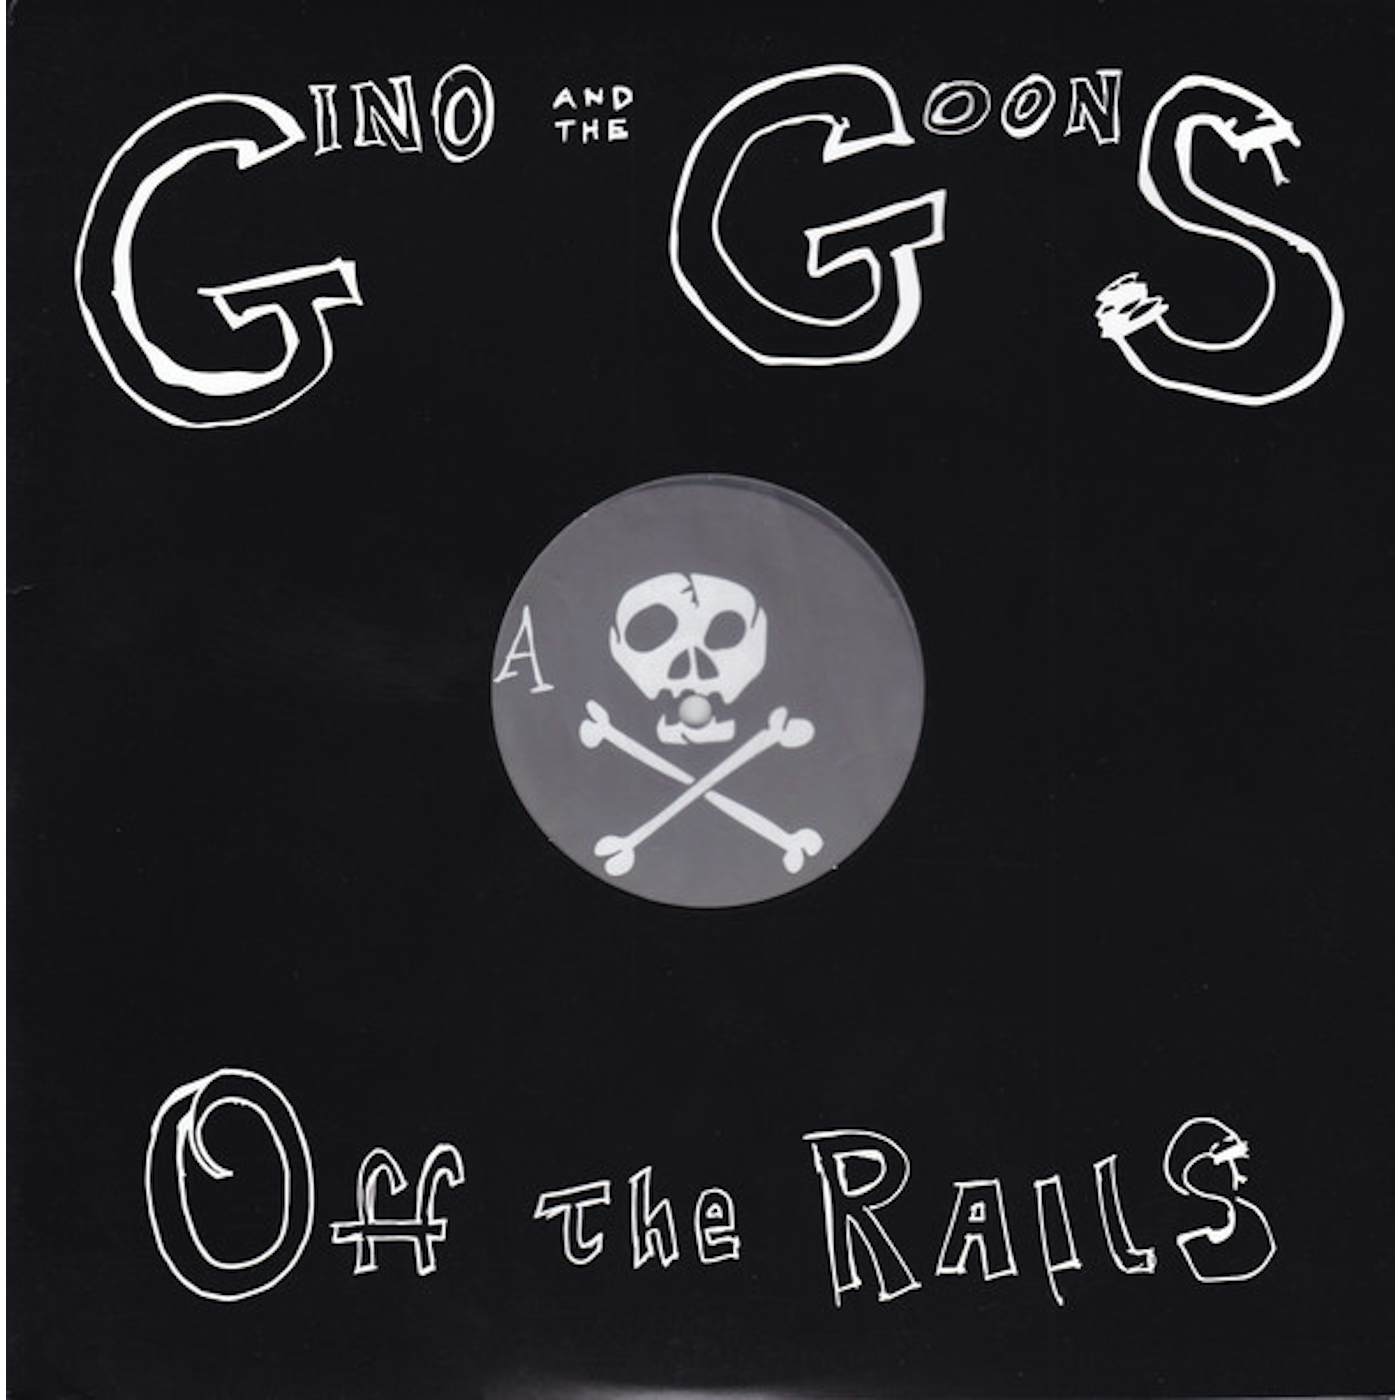 Gino and the Goons Off the Rails Vinyl Record